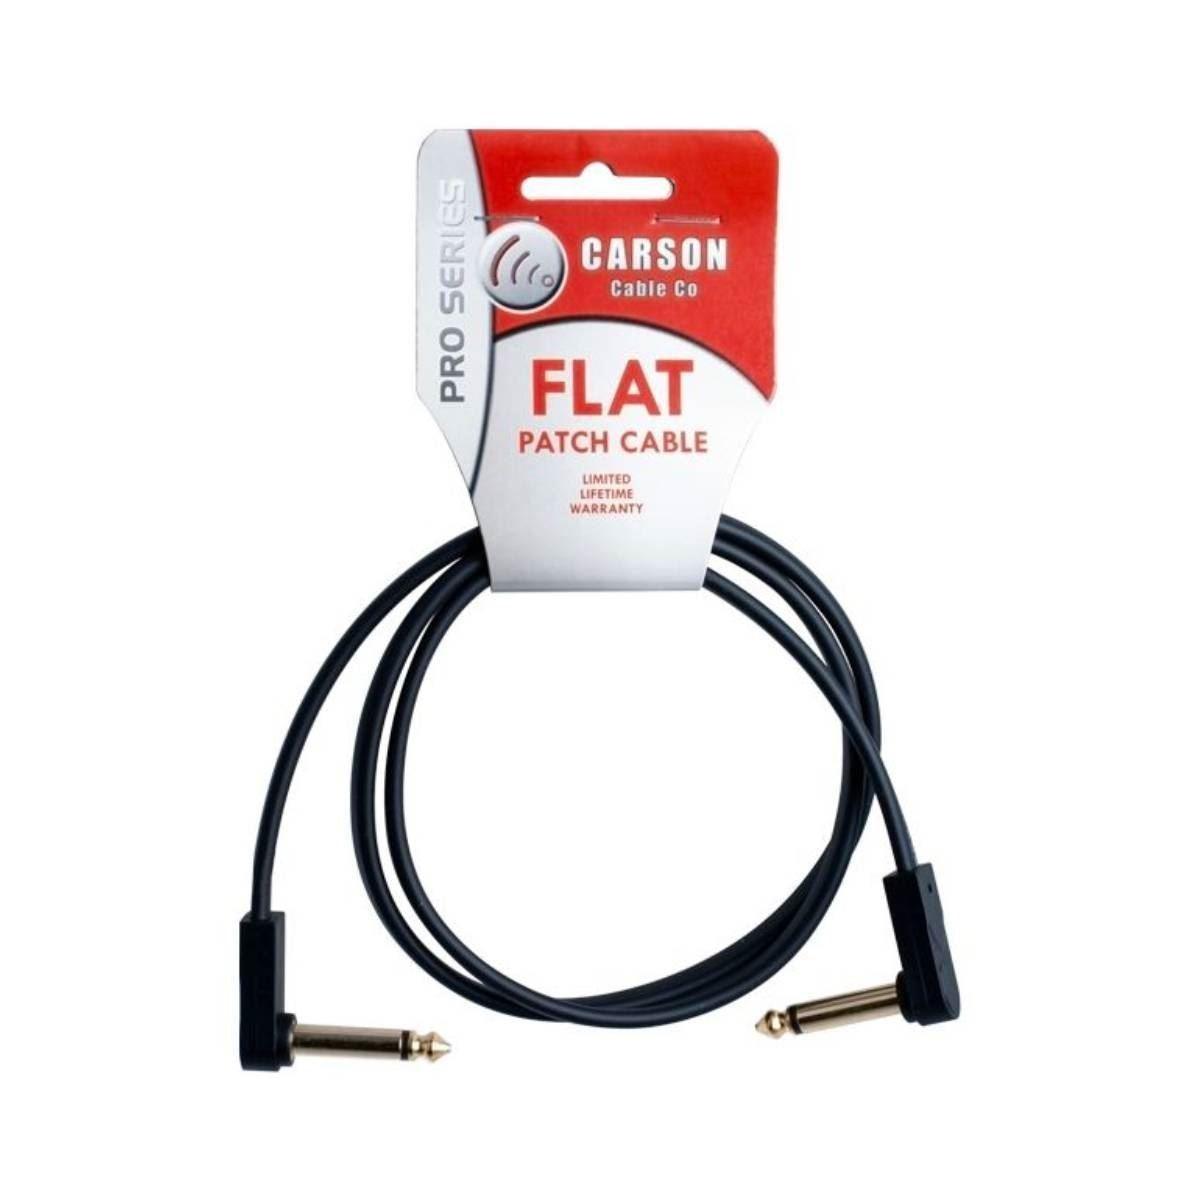 Carson FLAT3 Patch Cables 3 Foot - Accessories - Cables & Adaptors by Carson at Muso's Stuff